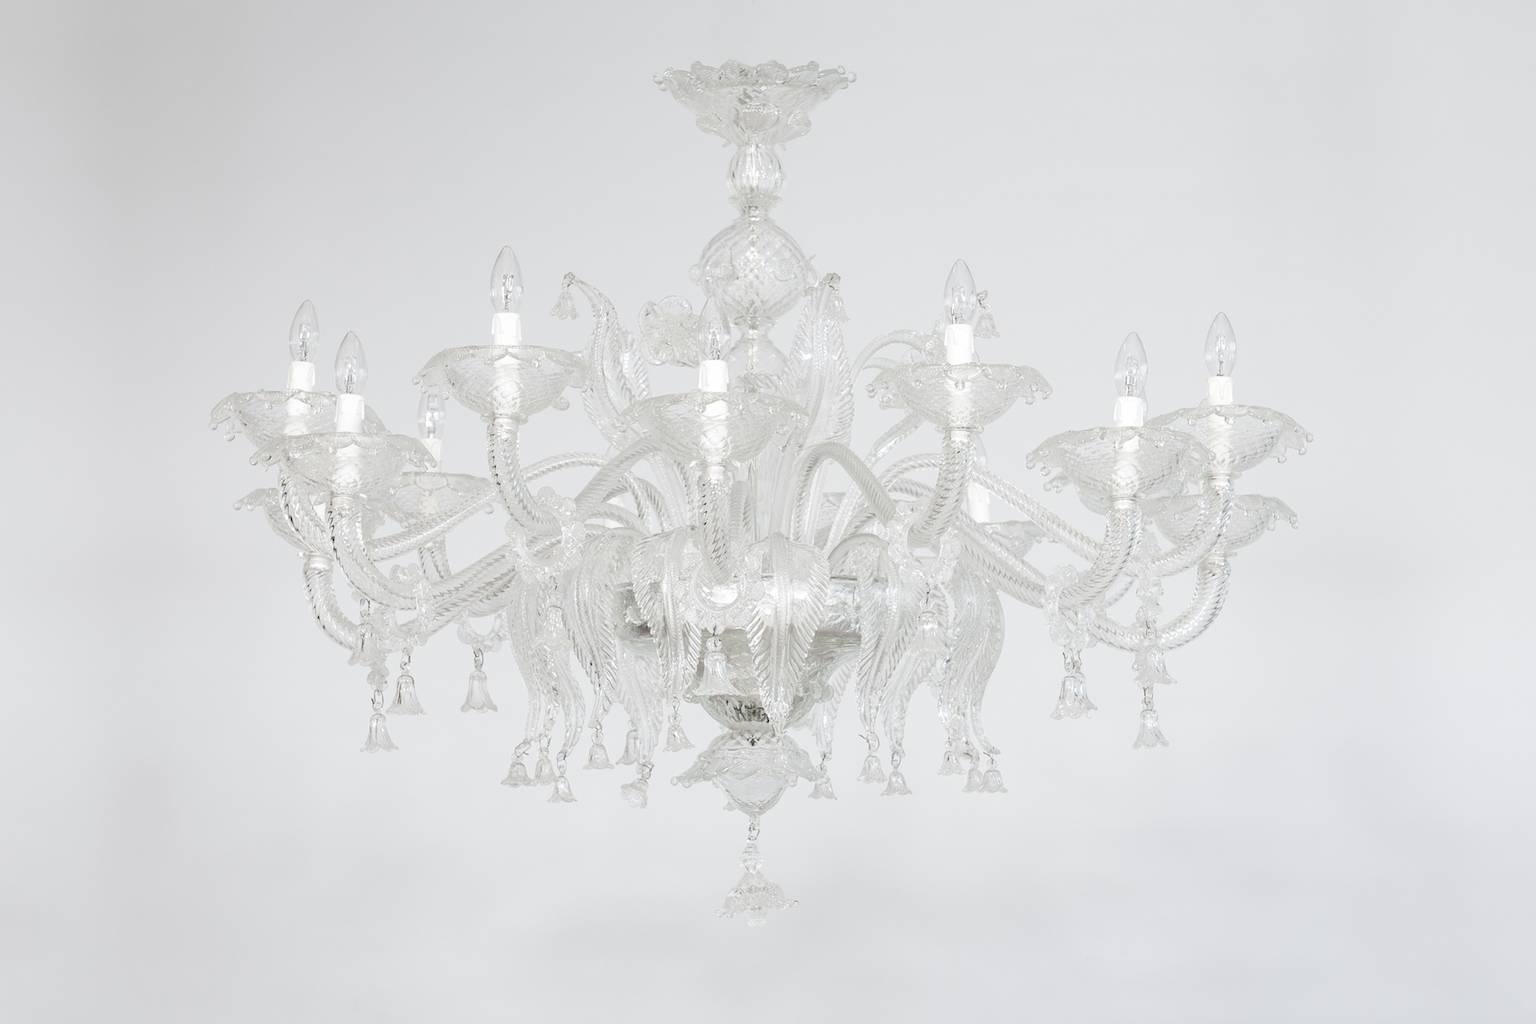 Customizable Italian Venetian Chandelier in Murano Glass Clear Color, Italy .
This beautiful and refined Italian chandelier in transparent glass was entirely handblown during 2000s,  in the Venetian island of Murano, and it is attributed to the